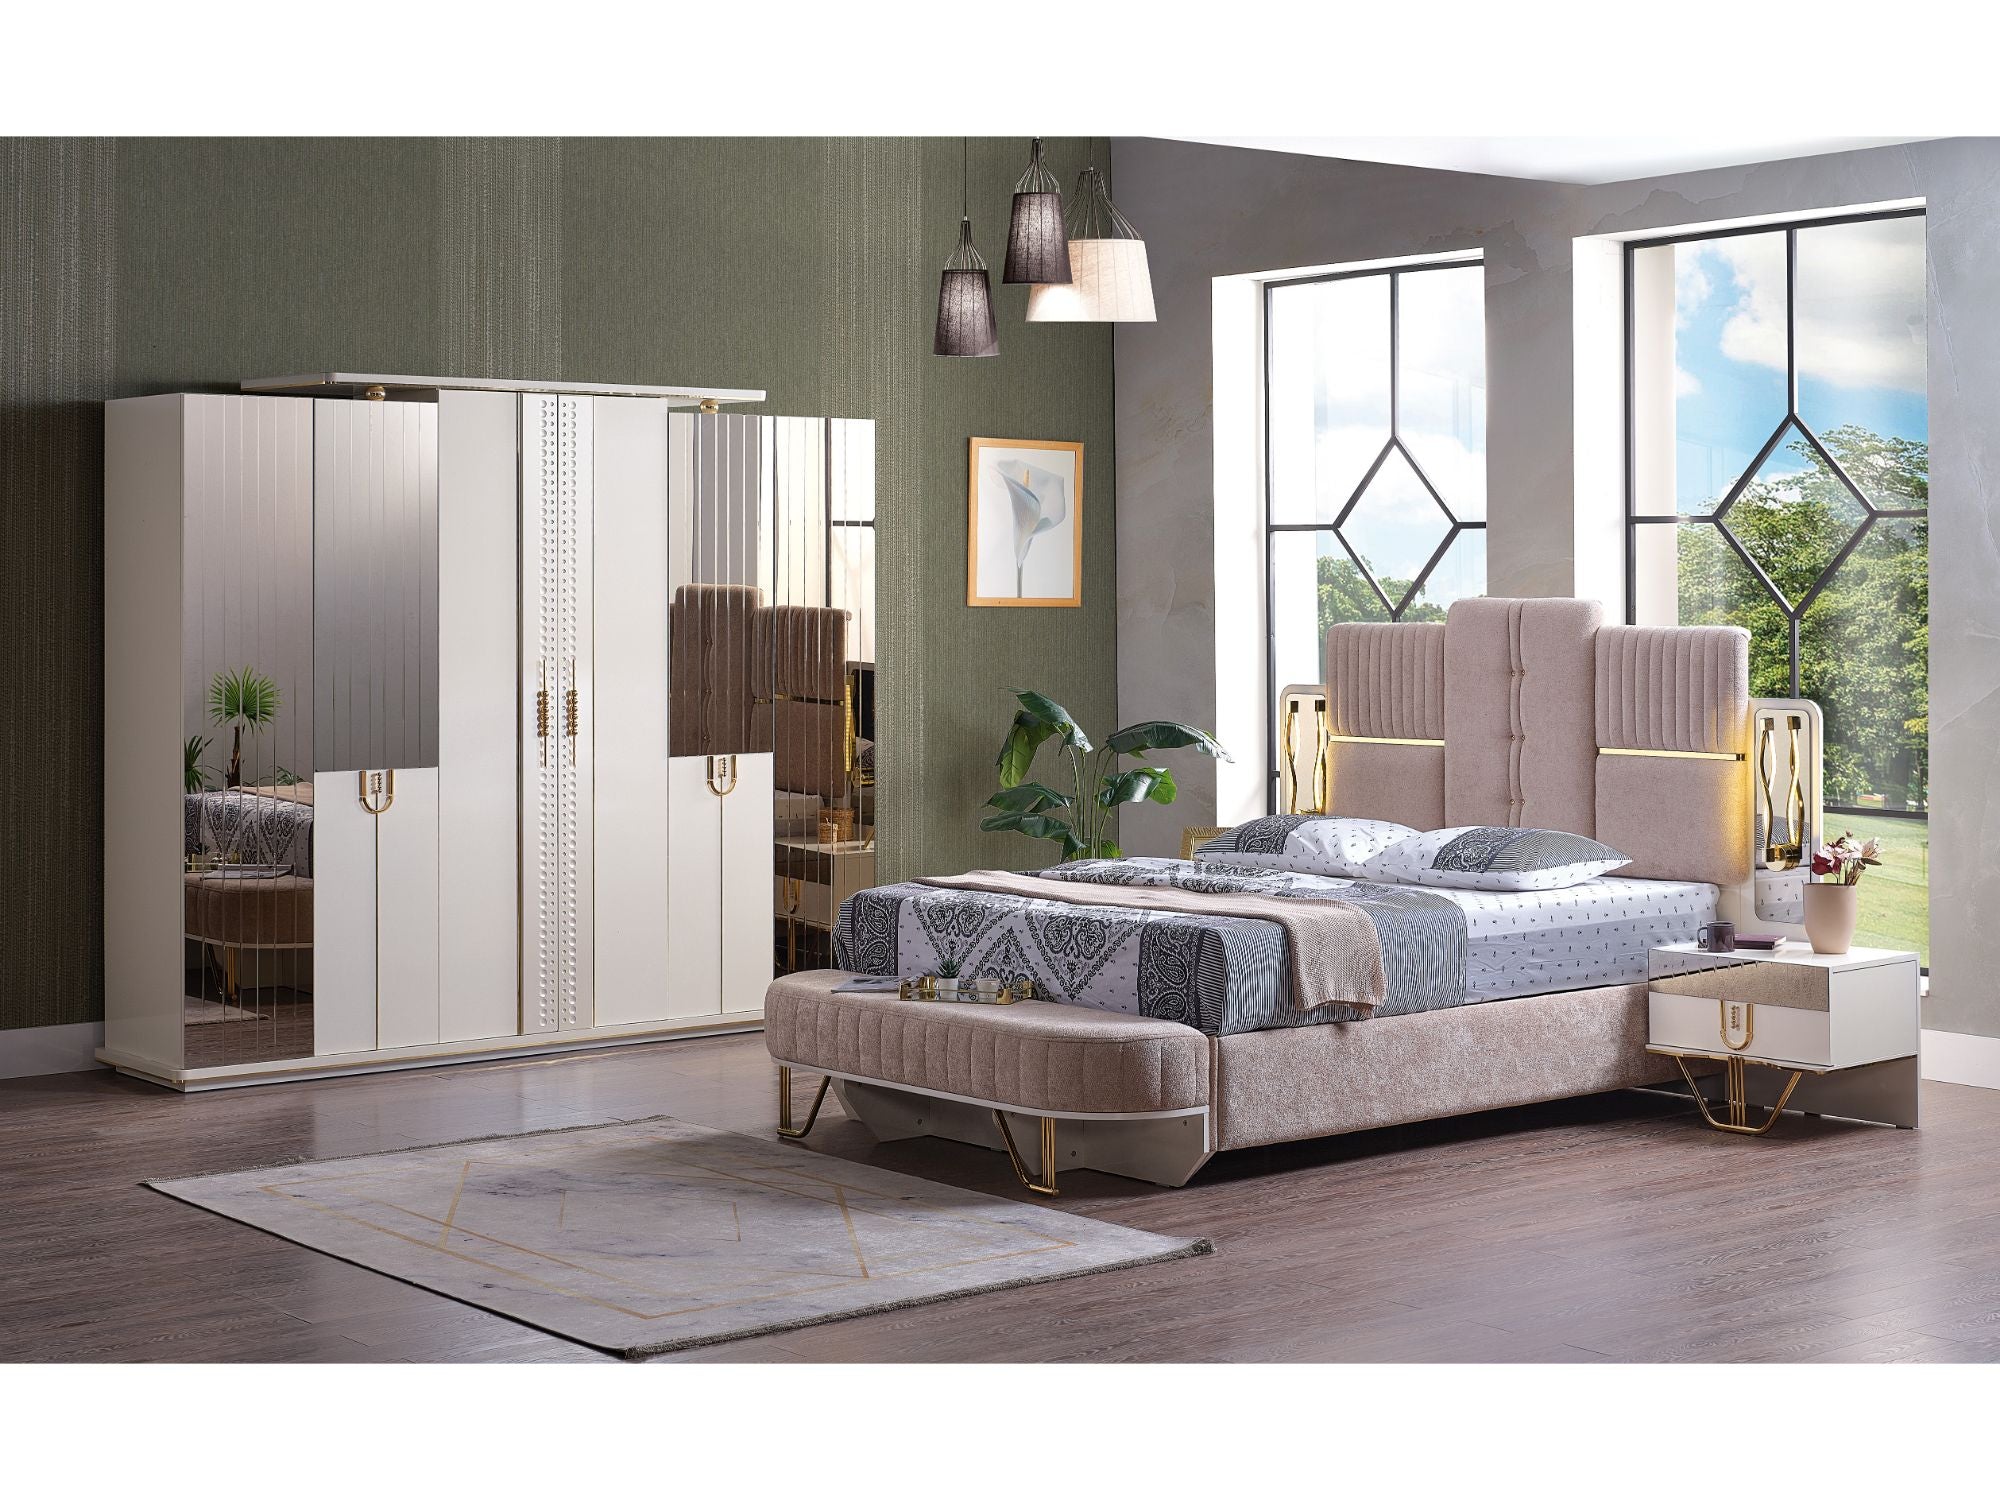 Valence Storage Bed With Headboard